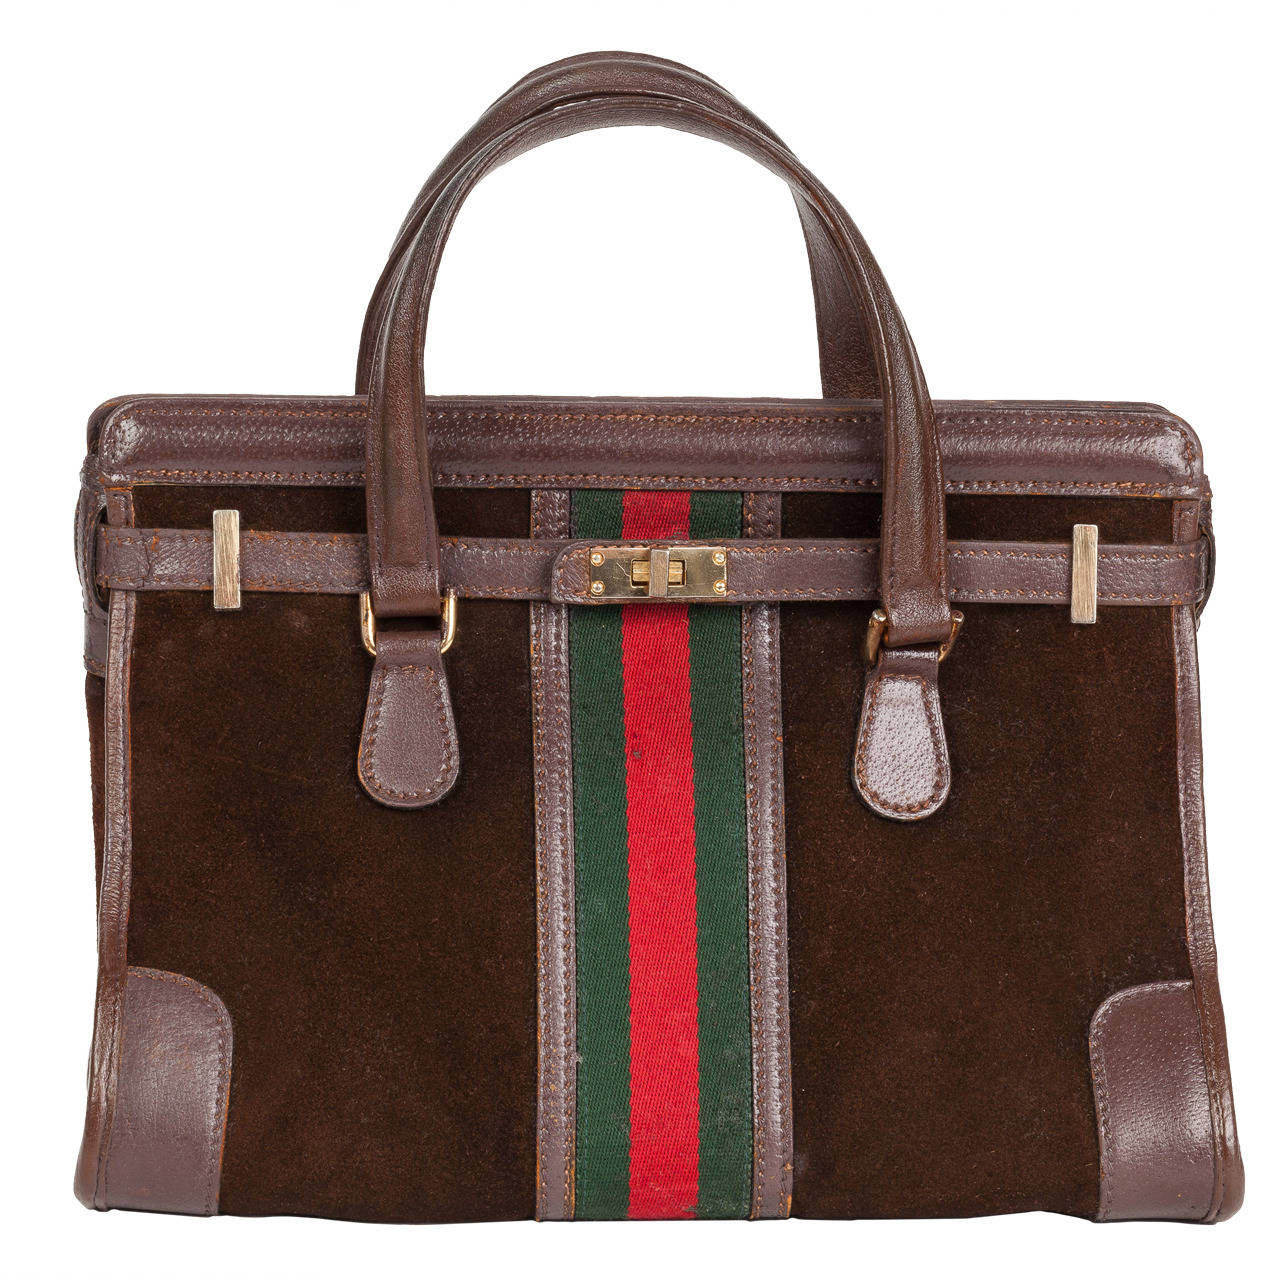 Gucci Vintage 1970s Brown Suede and Leather Top Handle Bag